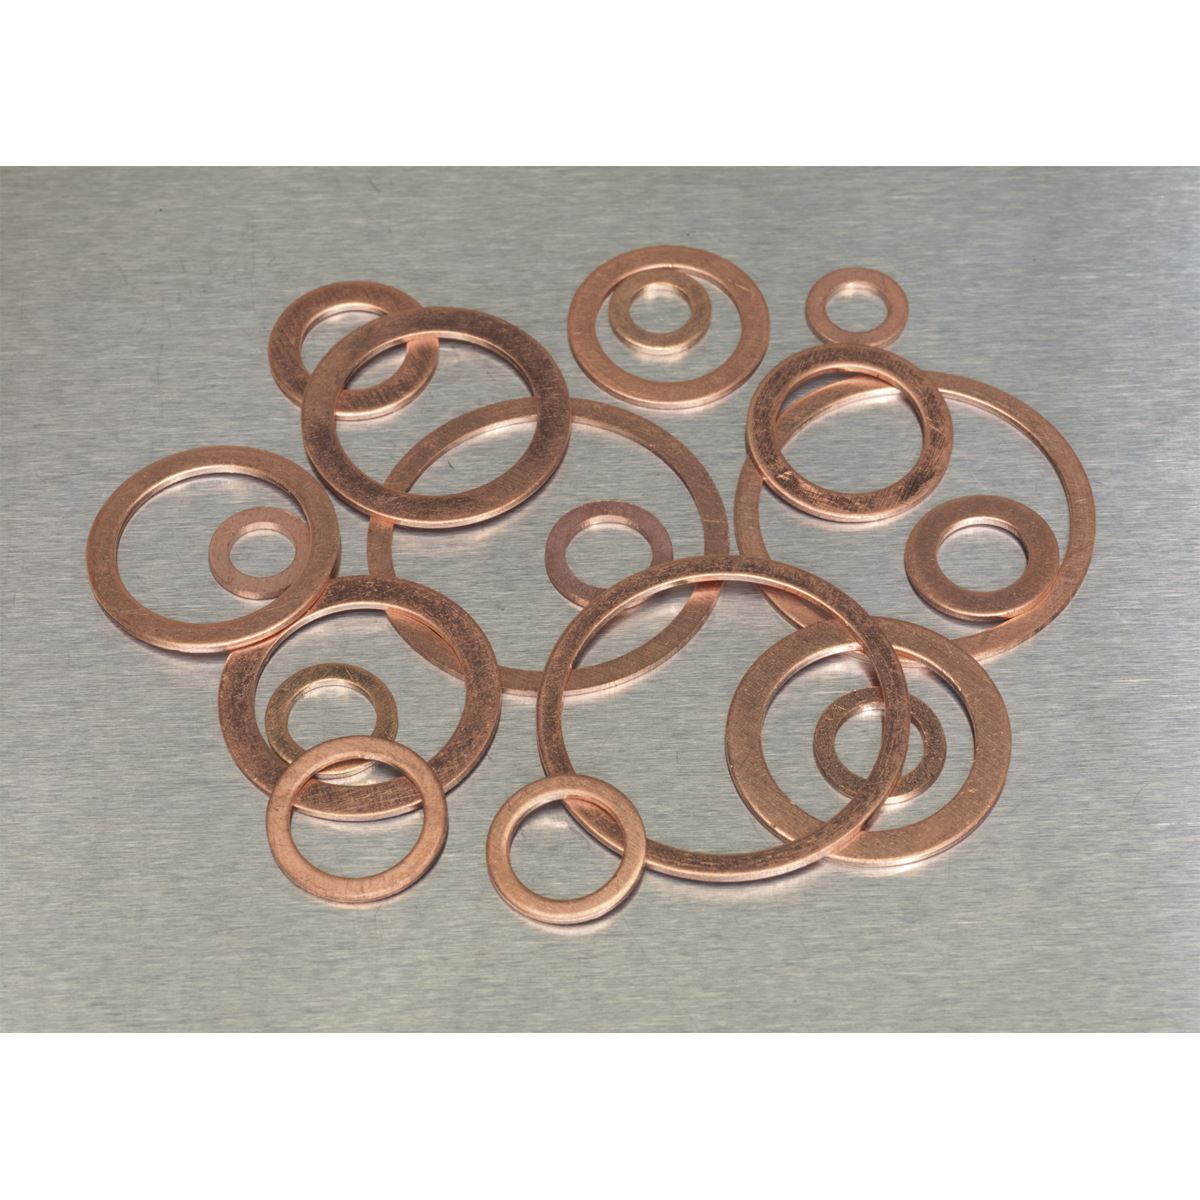 Sealey Copper Sealing Washer Assortment 250pc - Metric